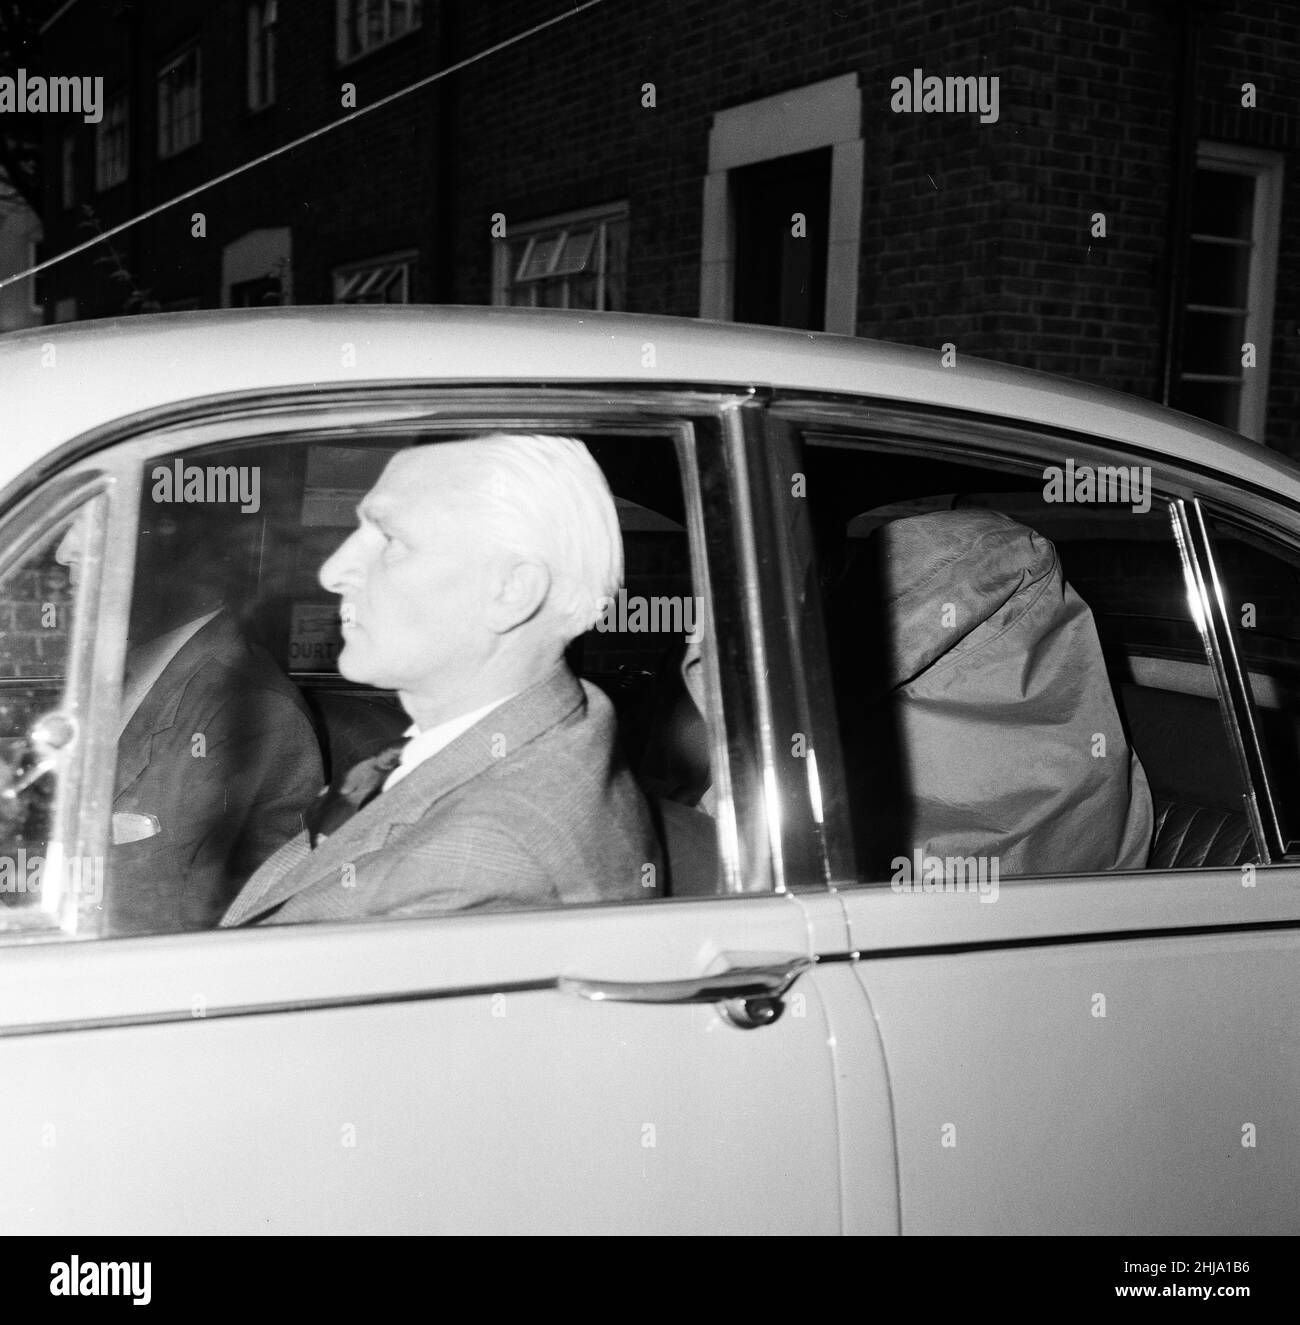 The first gang member of Great Train Robbery has been caught, Roger Cordrey, with his friend, William Boal, Thursday 15th August 1963.  Our Picture Shows ... suspect leaving Bournemouth Police Station this evening, for Aylesbury, in the front passenger seat is Detective Superintendent Malcolm Fewtrell, Head of Buckinghamshire CID.  The suspects were living in a rented, fully furnished flat above a florist's shop in Wimborne Road, Moordown, Bournemouth.   The Bournemouth police were tipped off by police widow Ethel Clark when Boal and Cordrey paid rent for a garage (in Tweedale Road off Castle Stock Photo